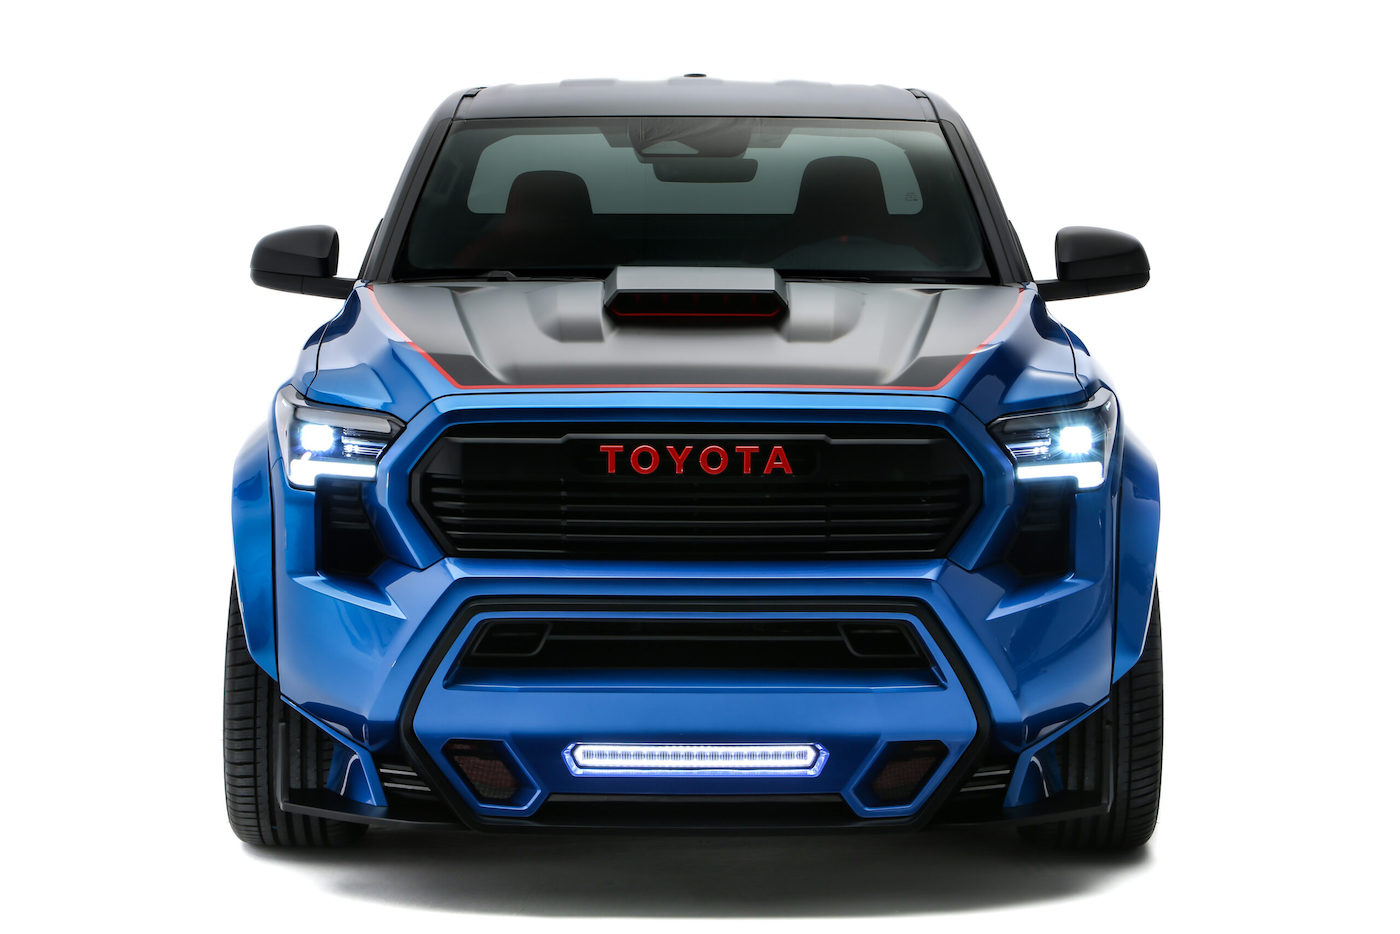 2024 Tacoma 2024 Tacoma X-Runner Concept Envisions Sport Truck with TRD Performance Package Upgrades Tacoma_X_Runner_Concept_Toyota_SEMA_2023_Hi-Res_12-scaled